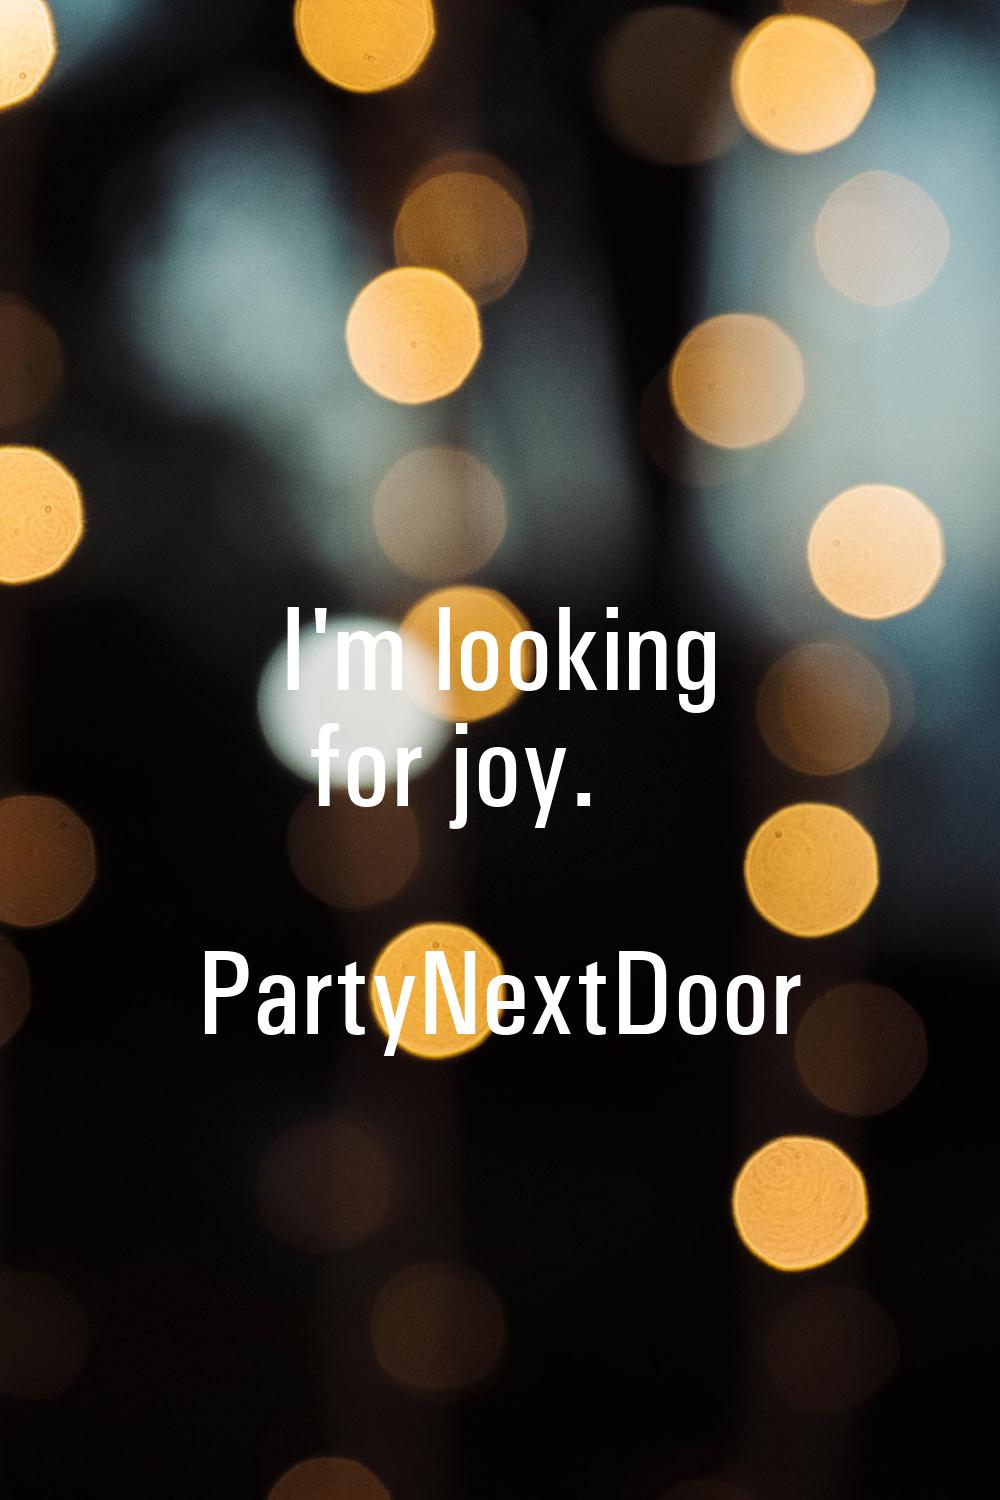 I'm looking for joy.